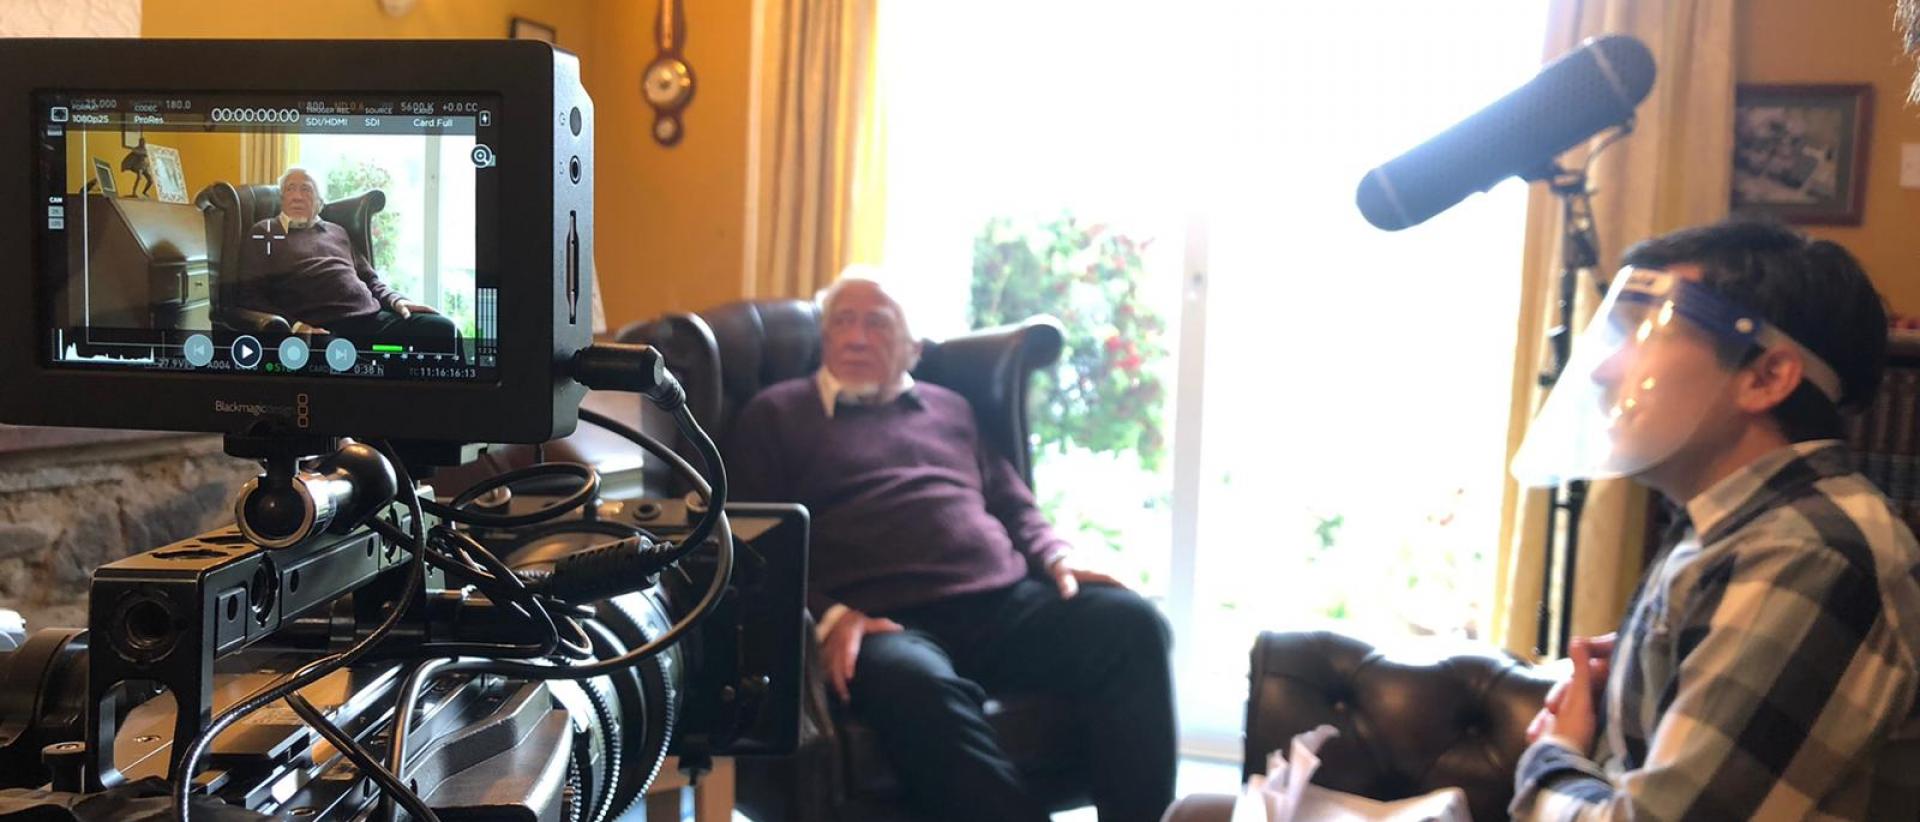 behind the scenes of a short film shoot, featuring a person being interviewed in their living room on camera. The interviewer is wearing a full face covering.